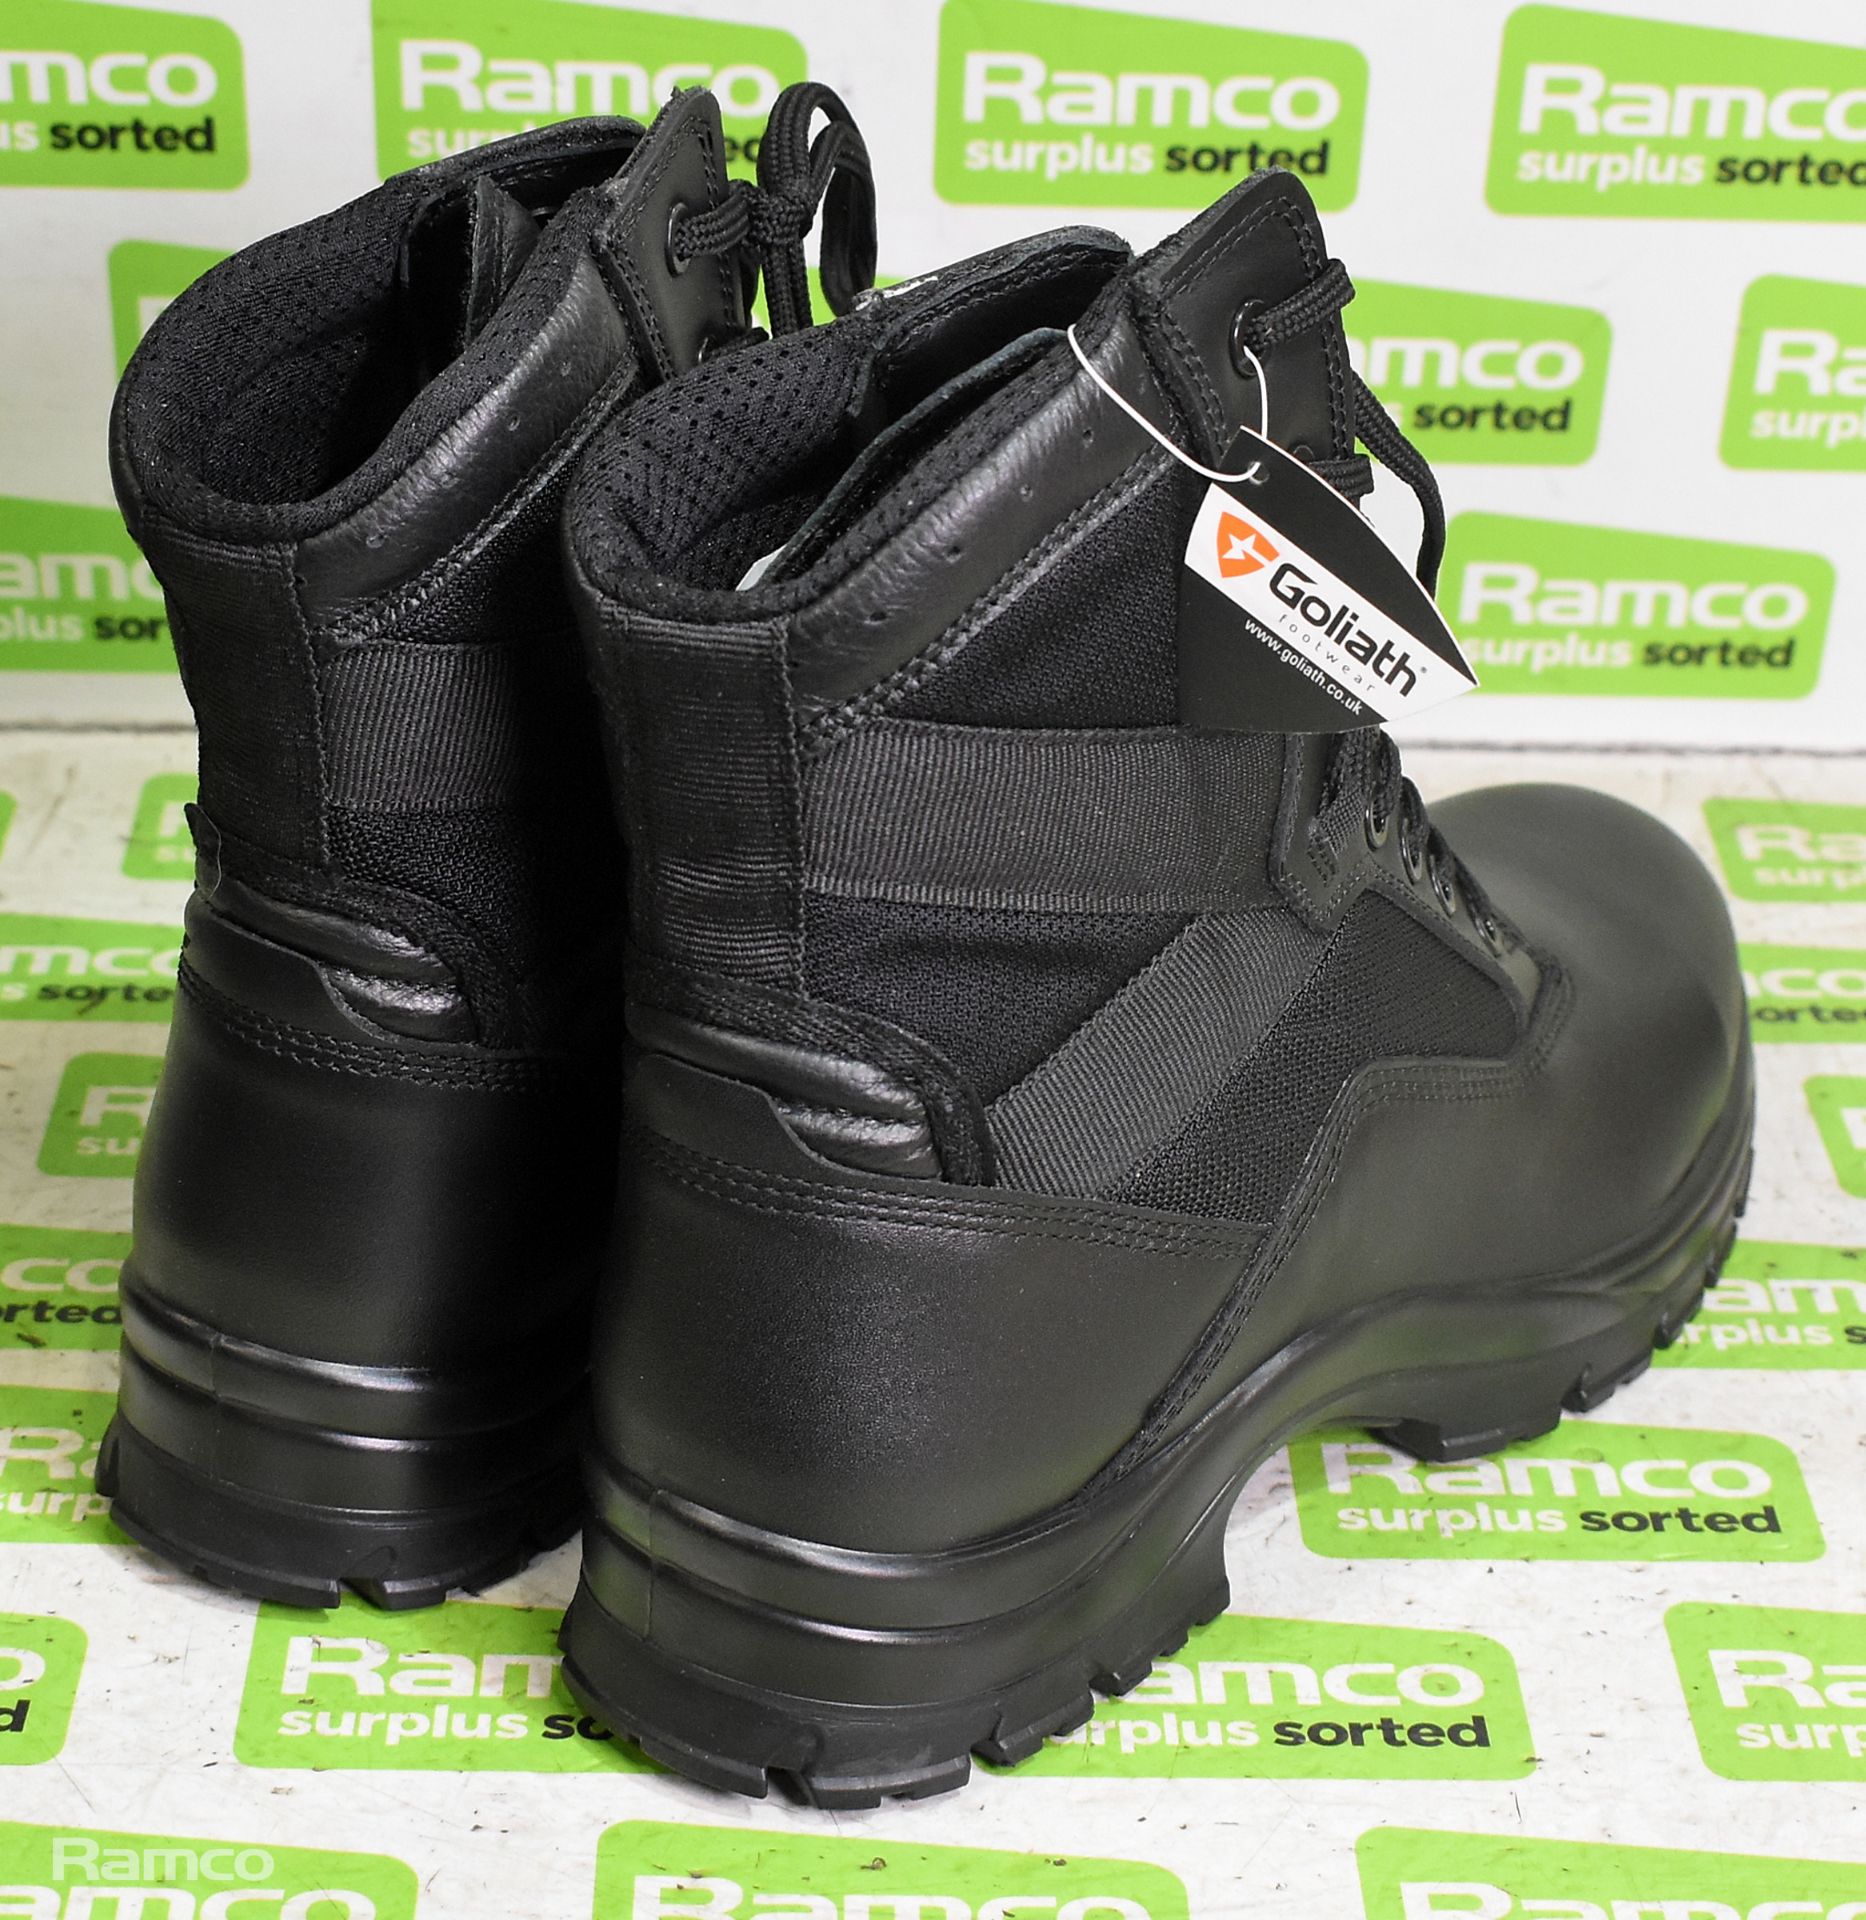 3x pairs of Goliath warm weather boots - Size 9L - Image 3 of 6